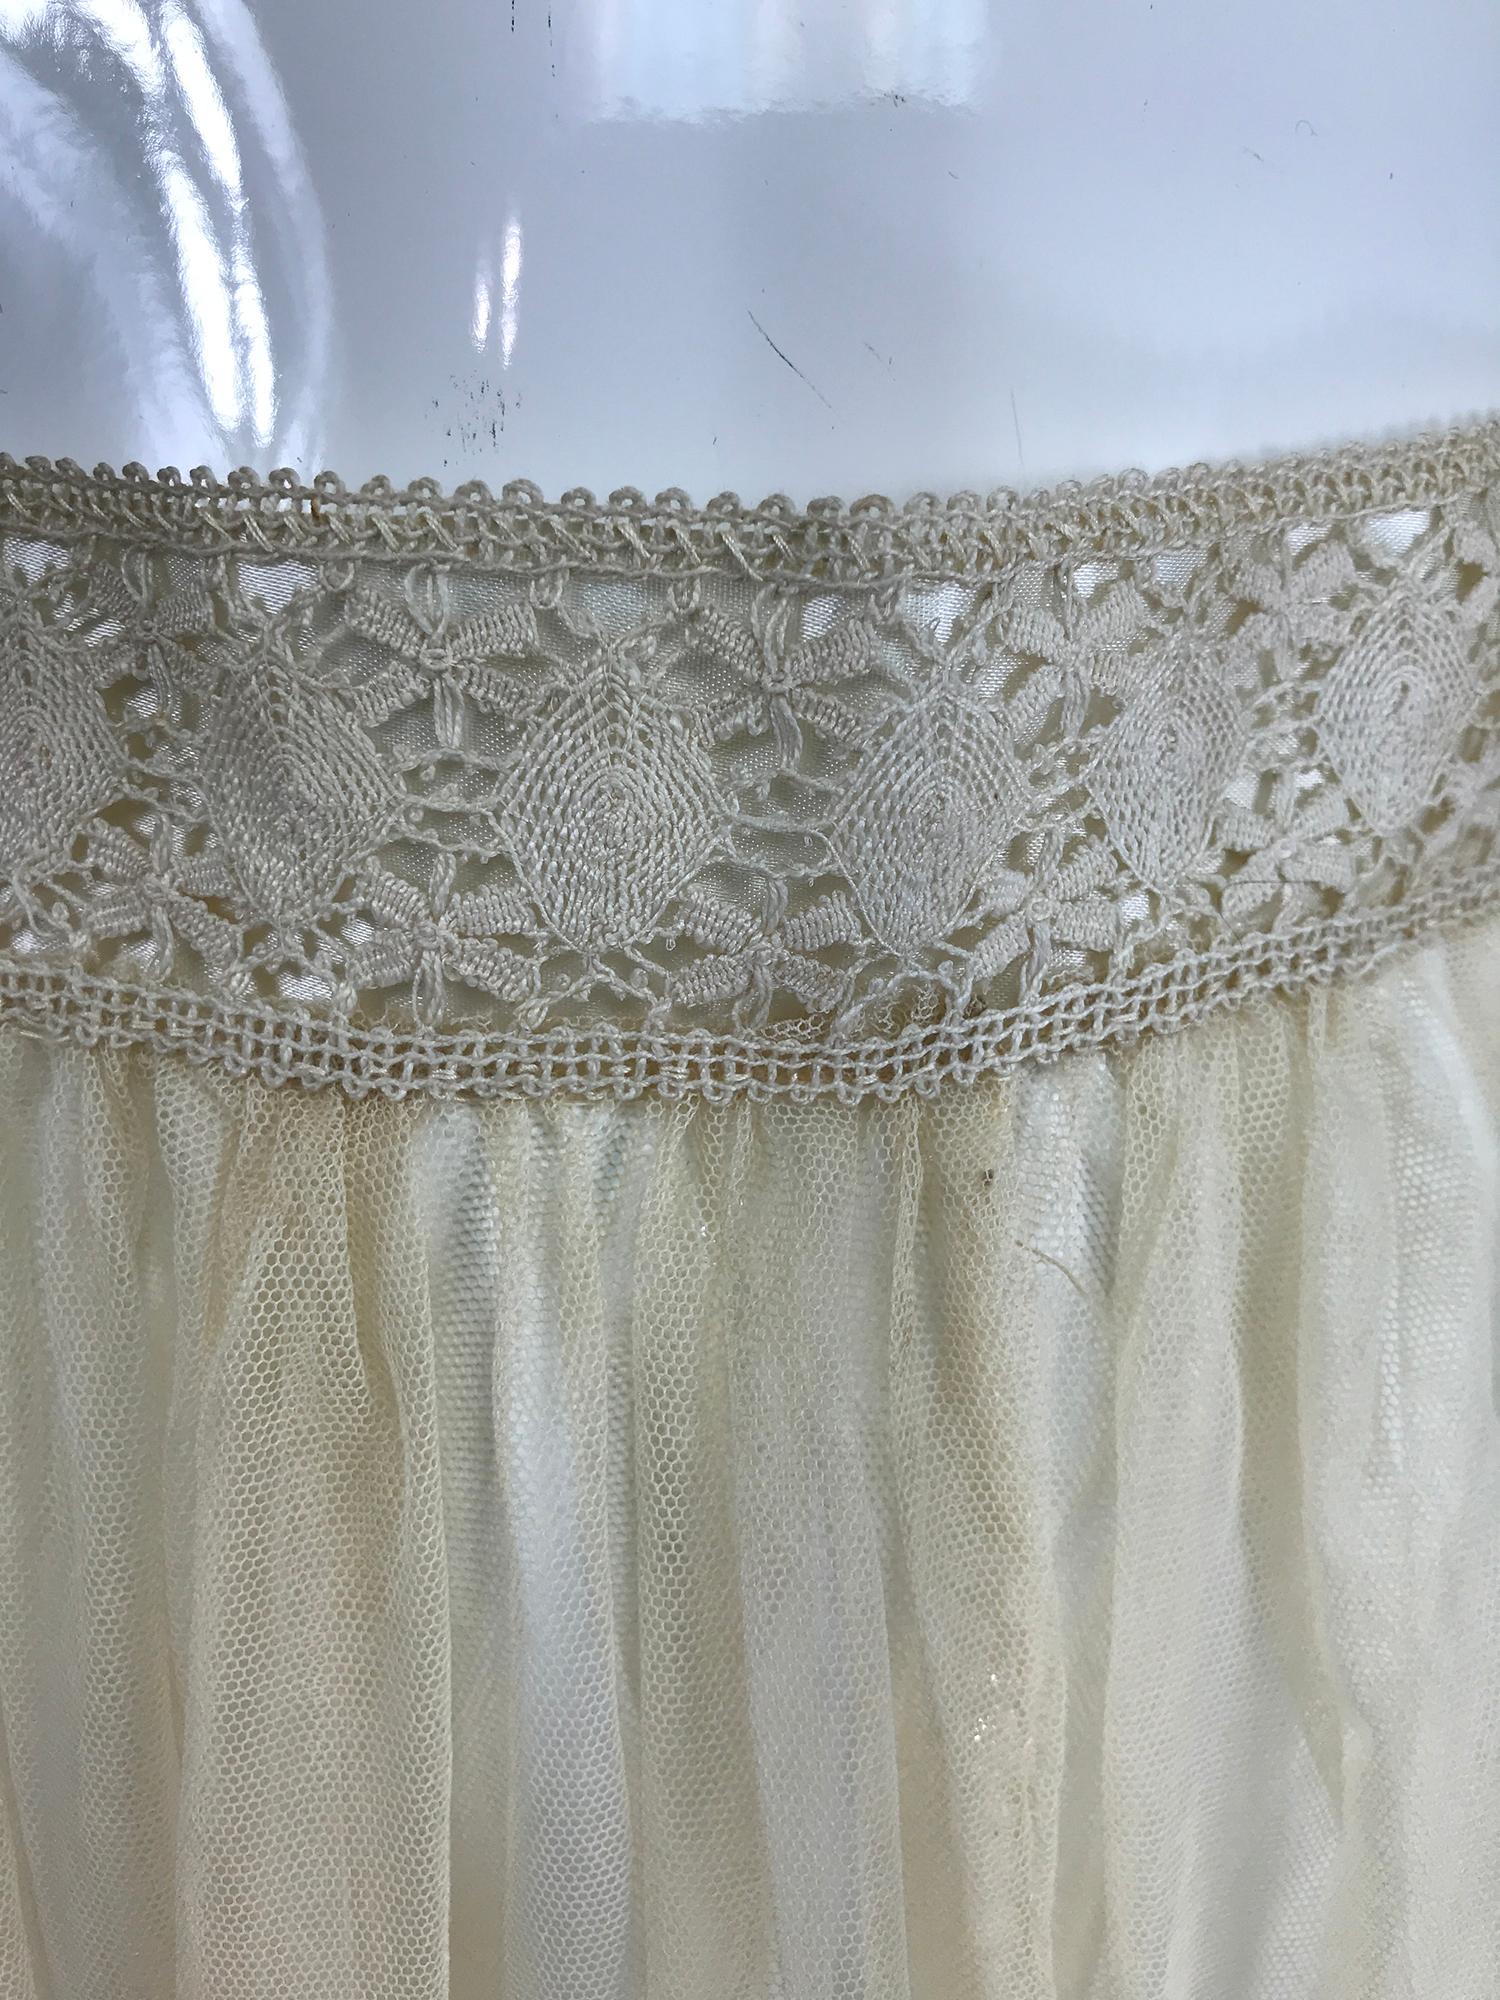 Edwardian Ecru Satin Stitch Embroidered Tulle Skirt 1900s For Sale 5